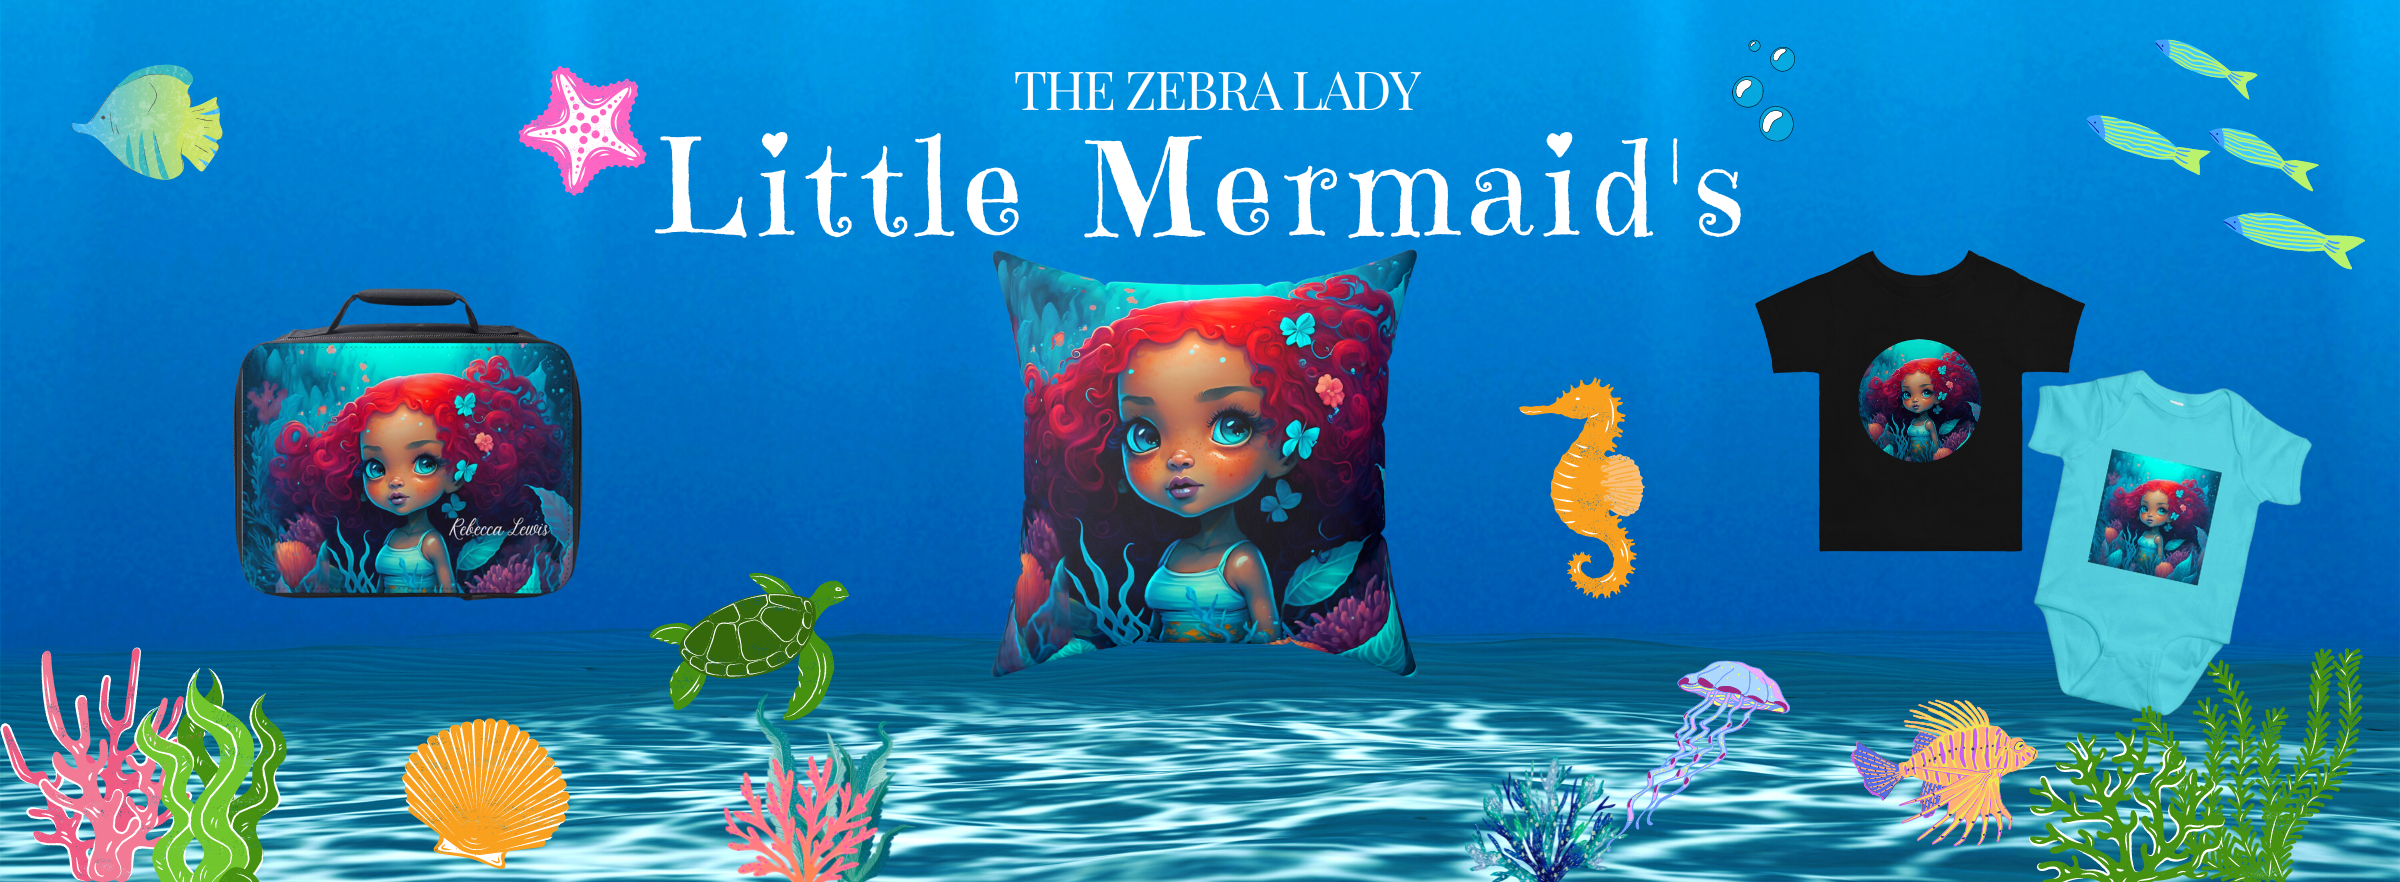 Little mermaids THE ZEBRA LADY  banner.png